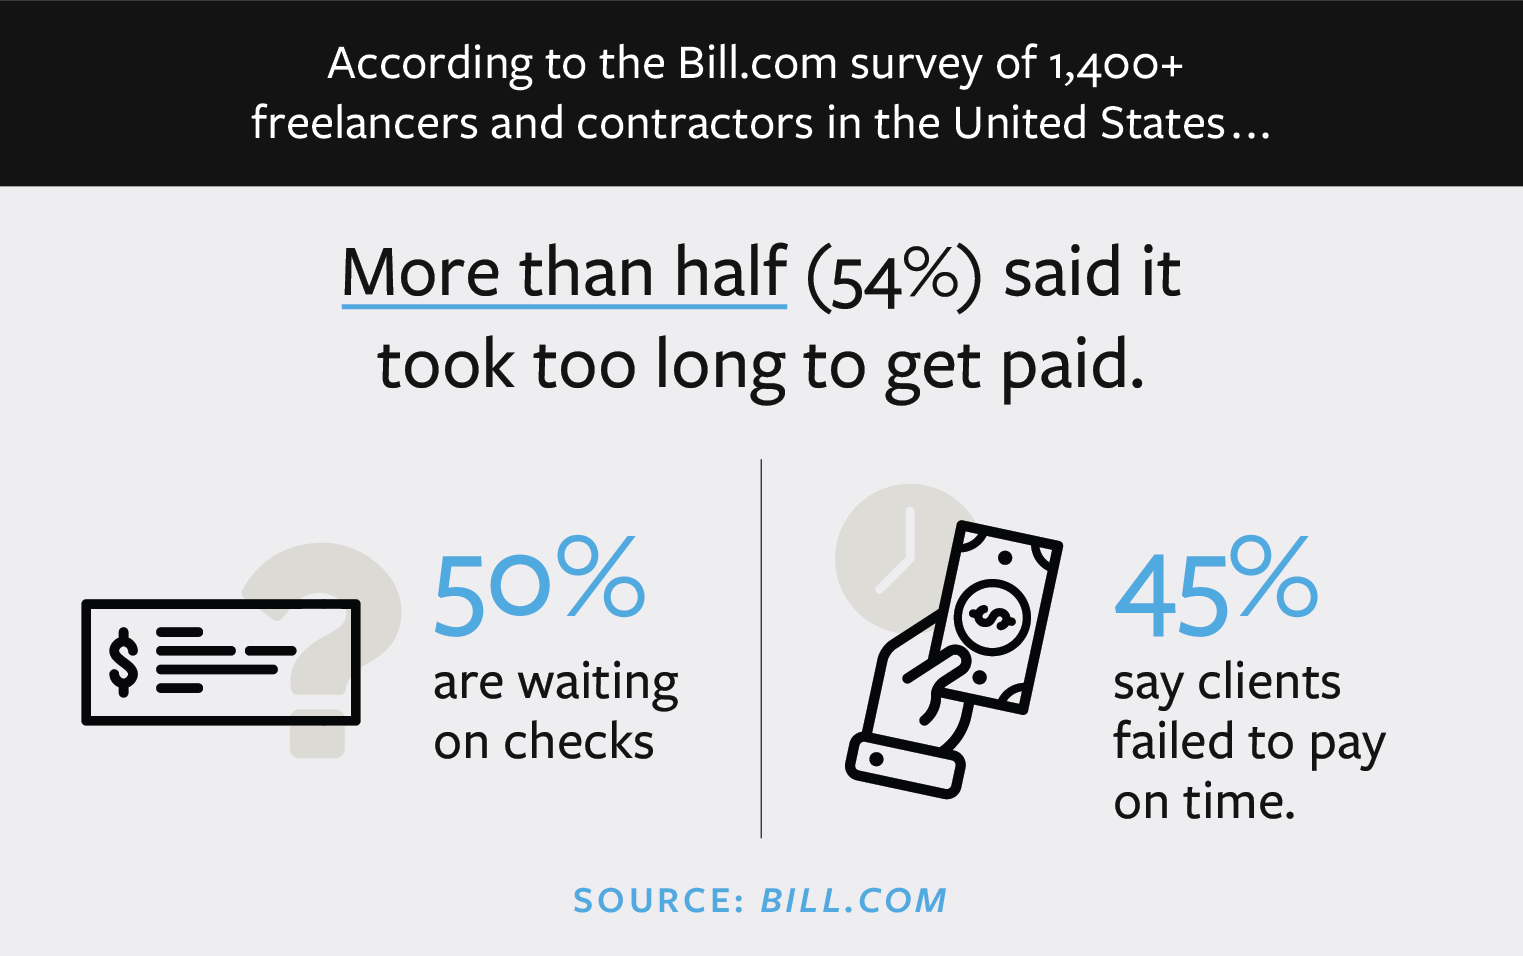 Statistics from Bill.com survey regarding late payments to freelancers